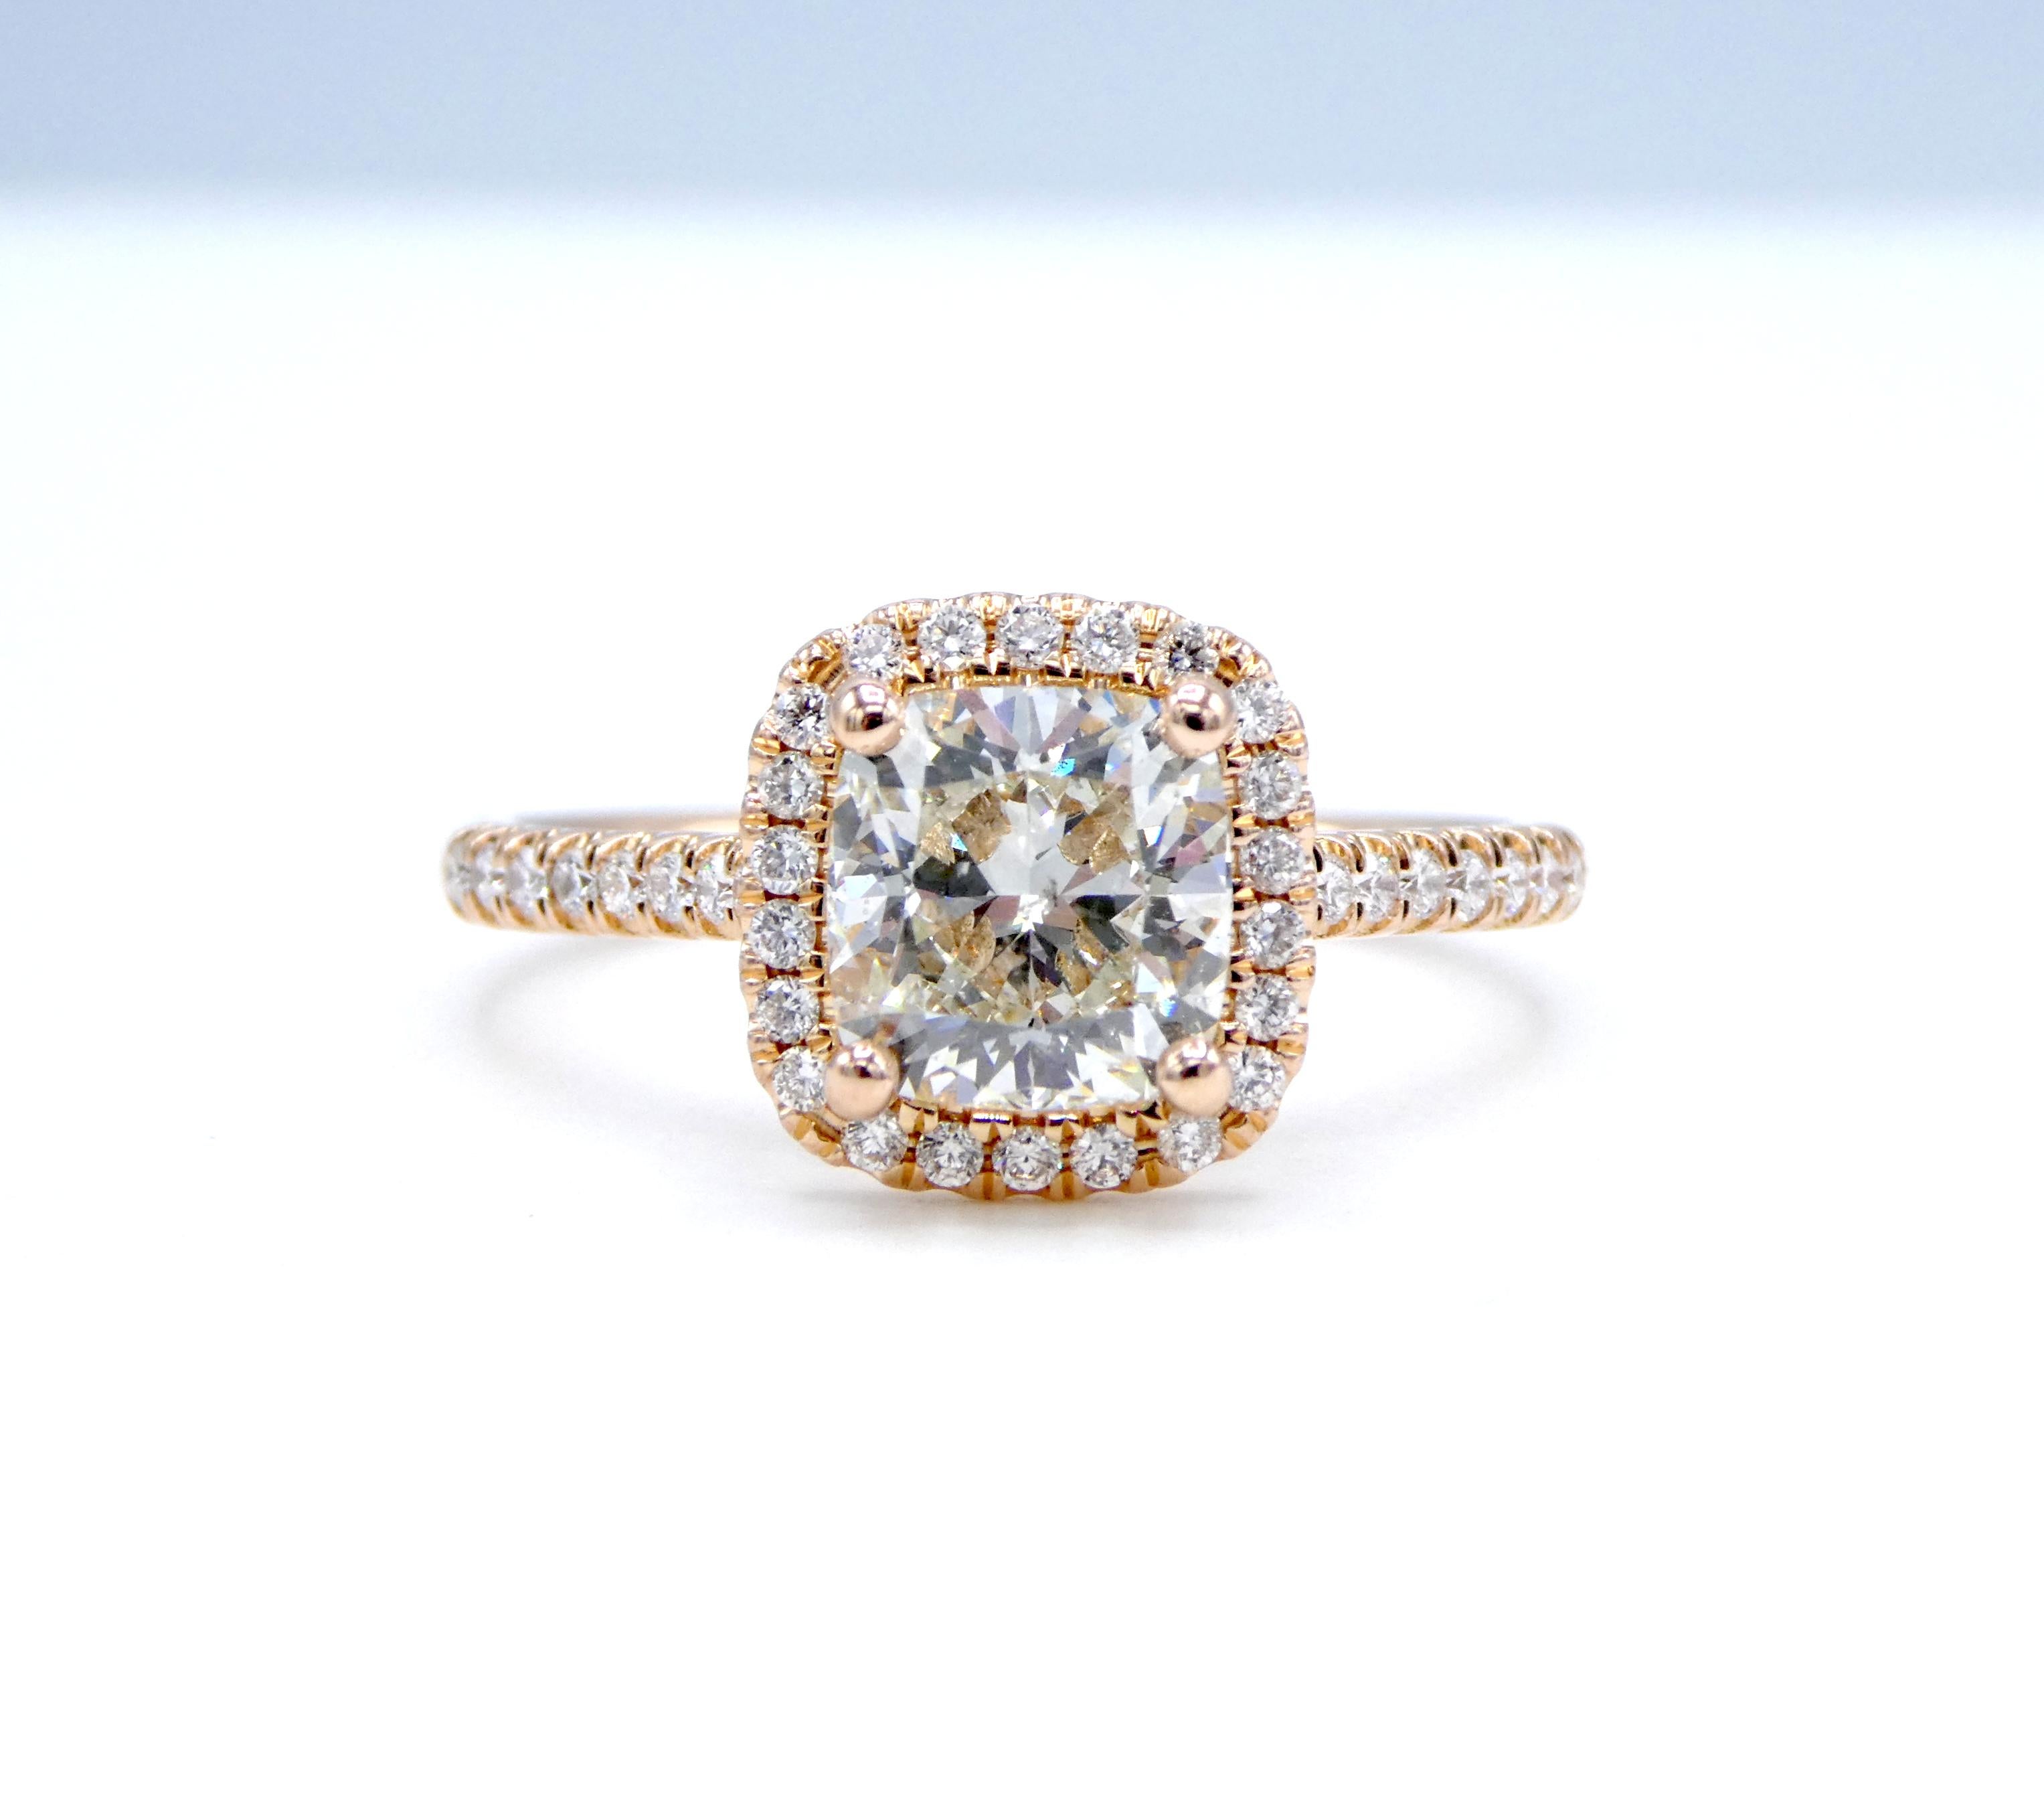 GIA Certified 1.85 Carat Cushion Cut Diamond 14k Rose Gold Halo Engagement Ring

GIA report number 2264731579
Diamond: 1.85 Carat Cushion Cut Diamond K SI2
Accent diamonds: 38 round brilliant cut approx. 0.15 carats G VS
Metal: 14k Rose Gold
Weight: